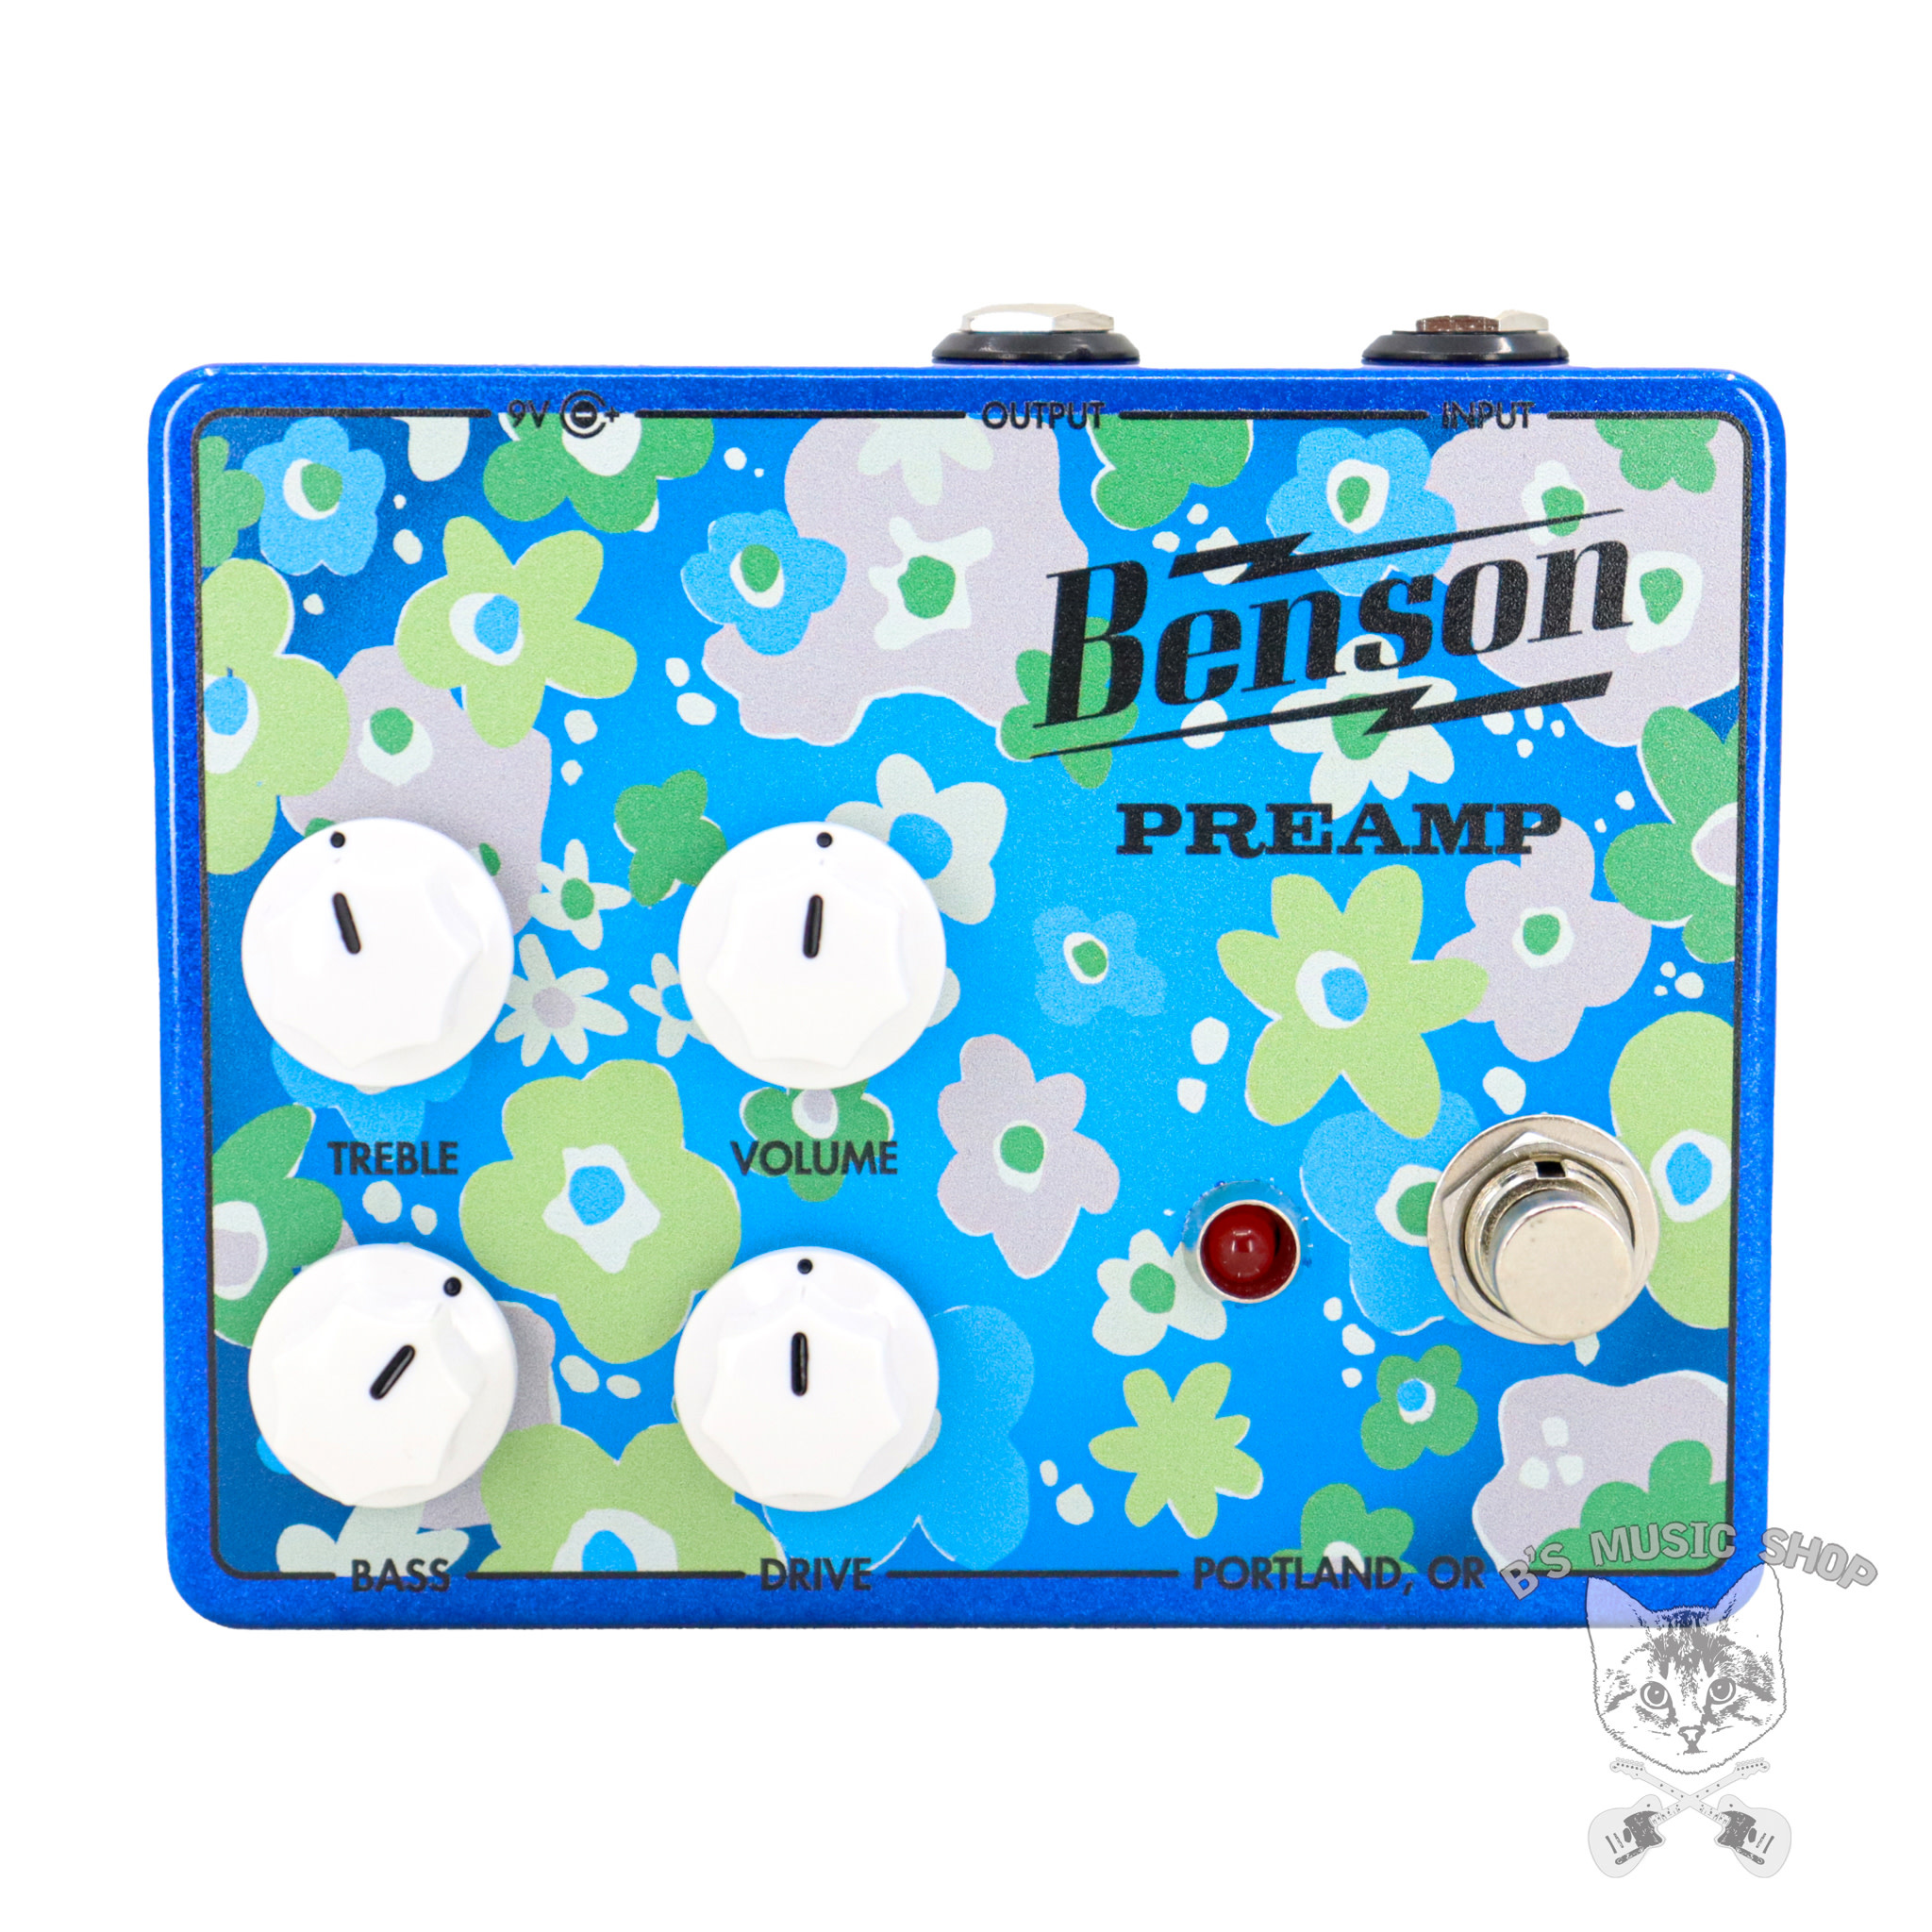 Benson Preamp - Flower Child Special Edition